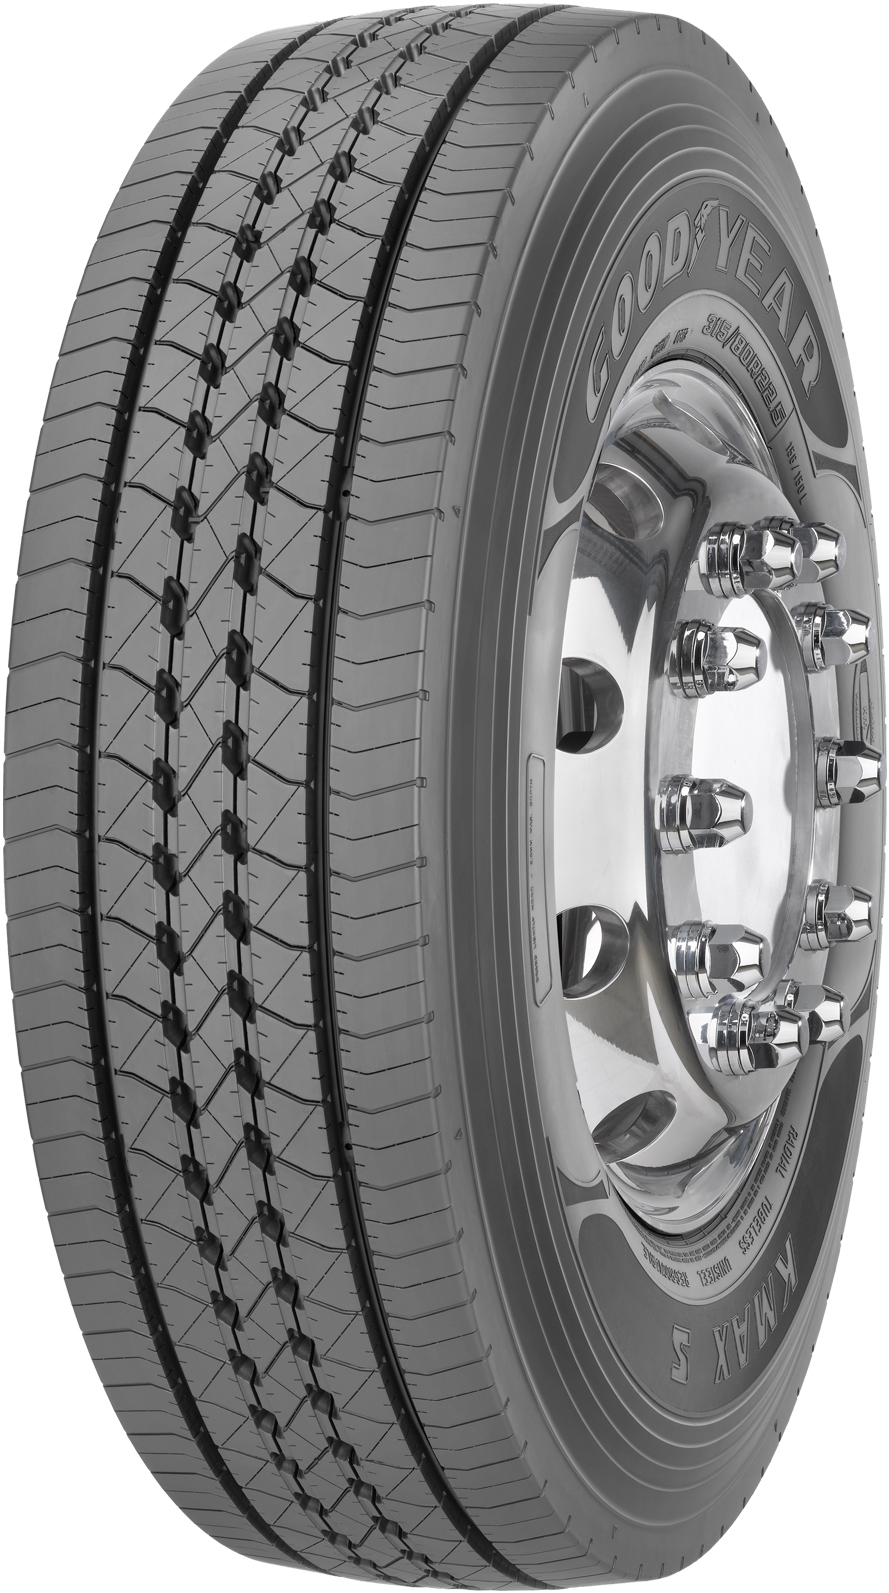 Anvelope camion GOODYEAR KMAXS 295/80 R22.5 154M